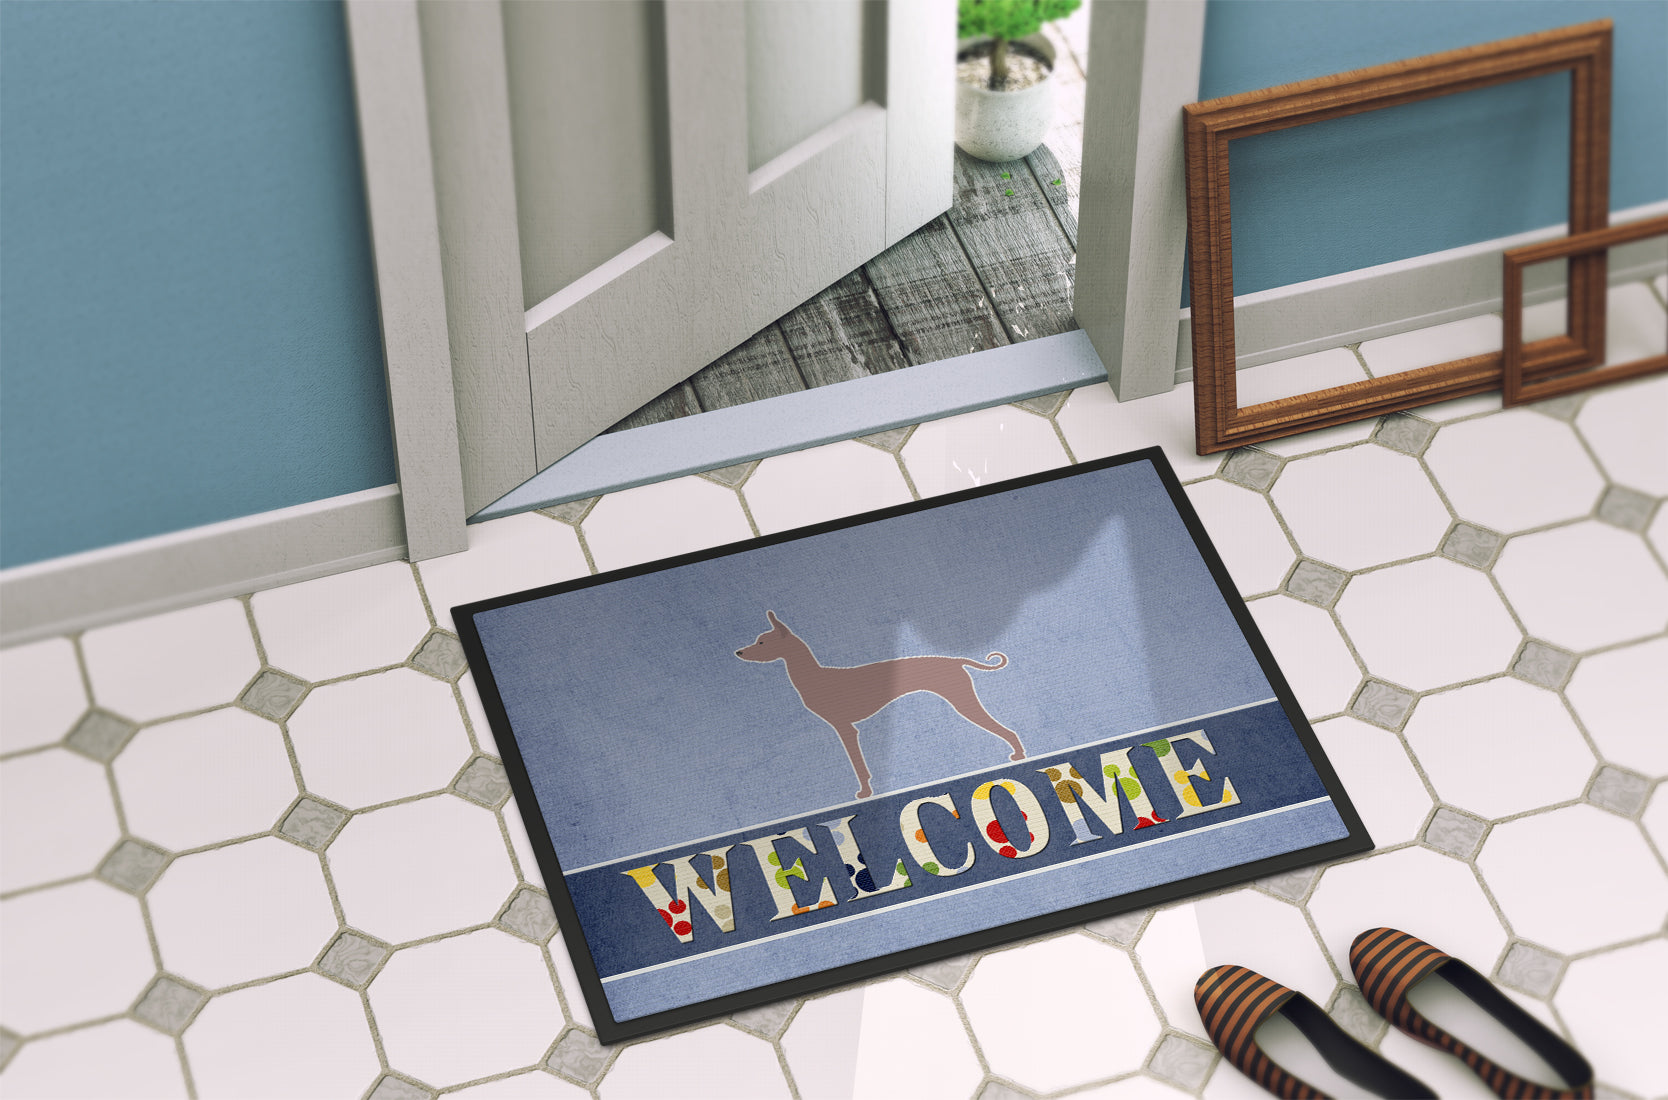 Dogo Argentino Welcome Indoor or Outdoor Mat 18x27 BB5571MAT - the-store.com